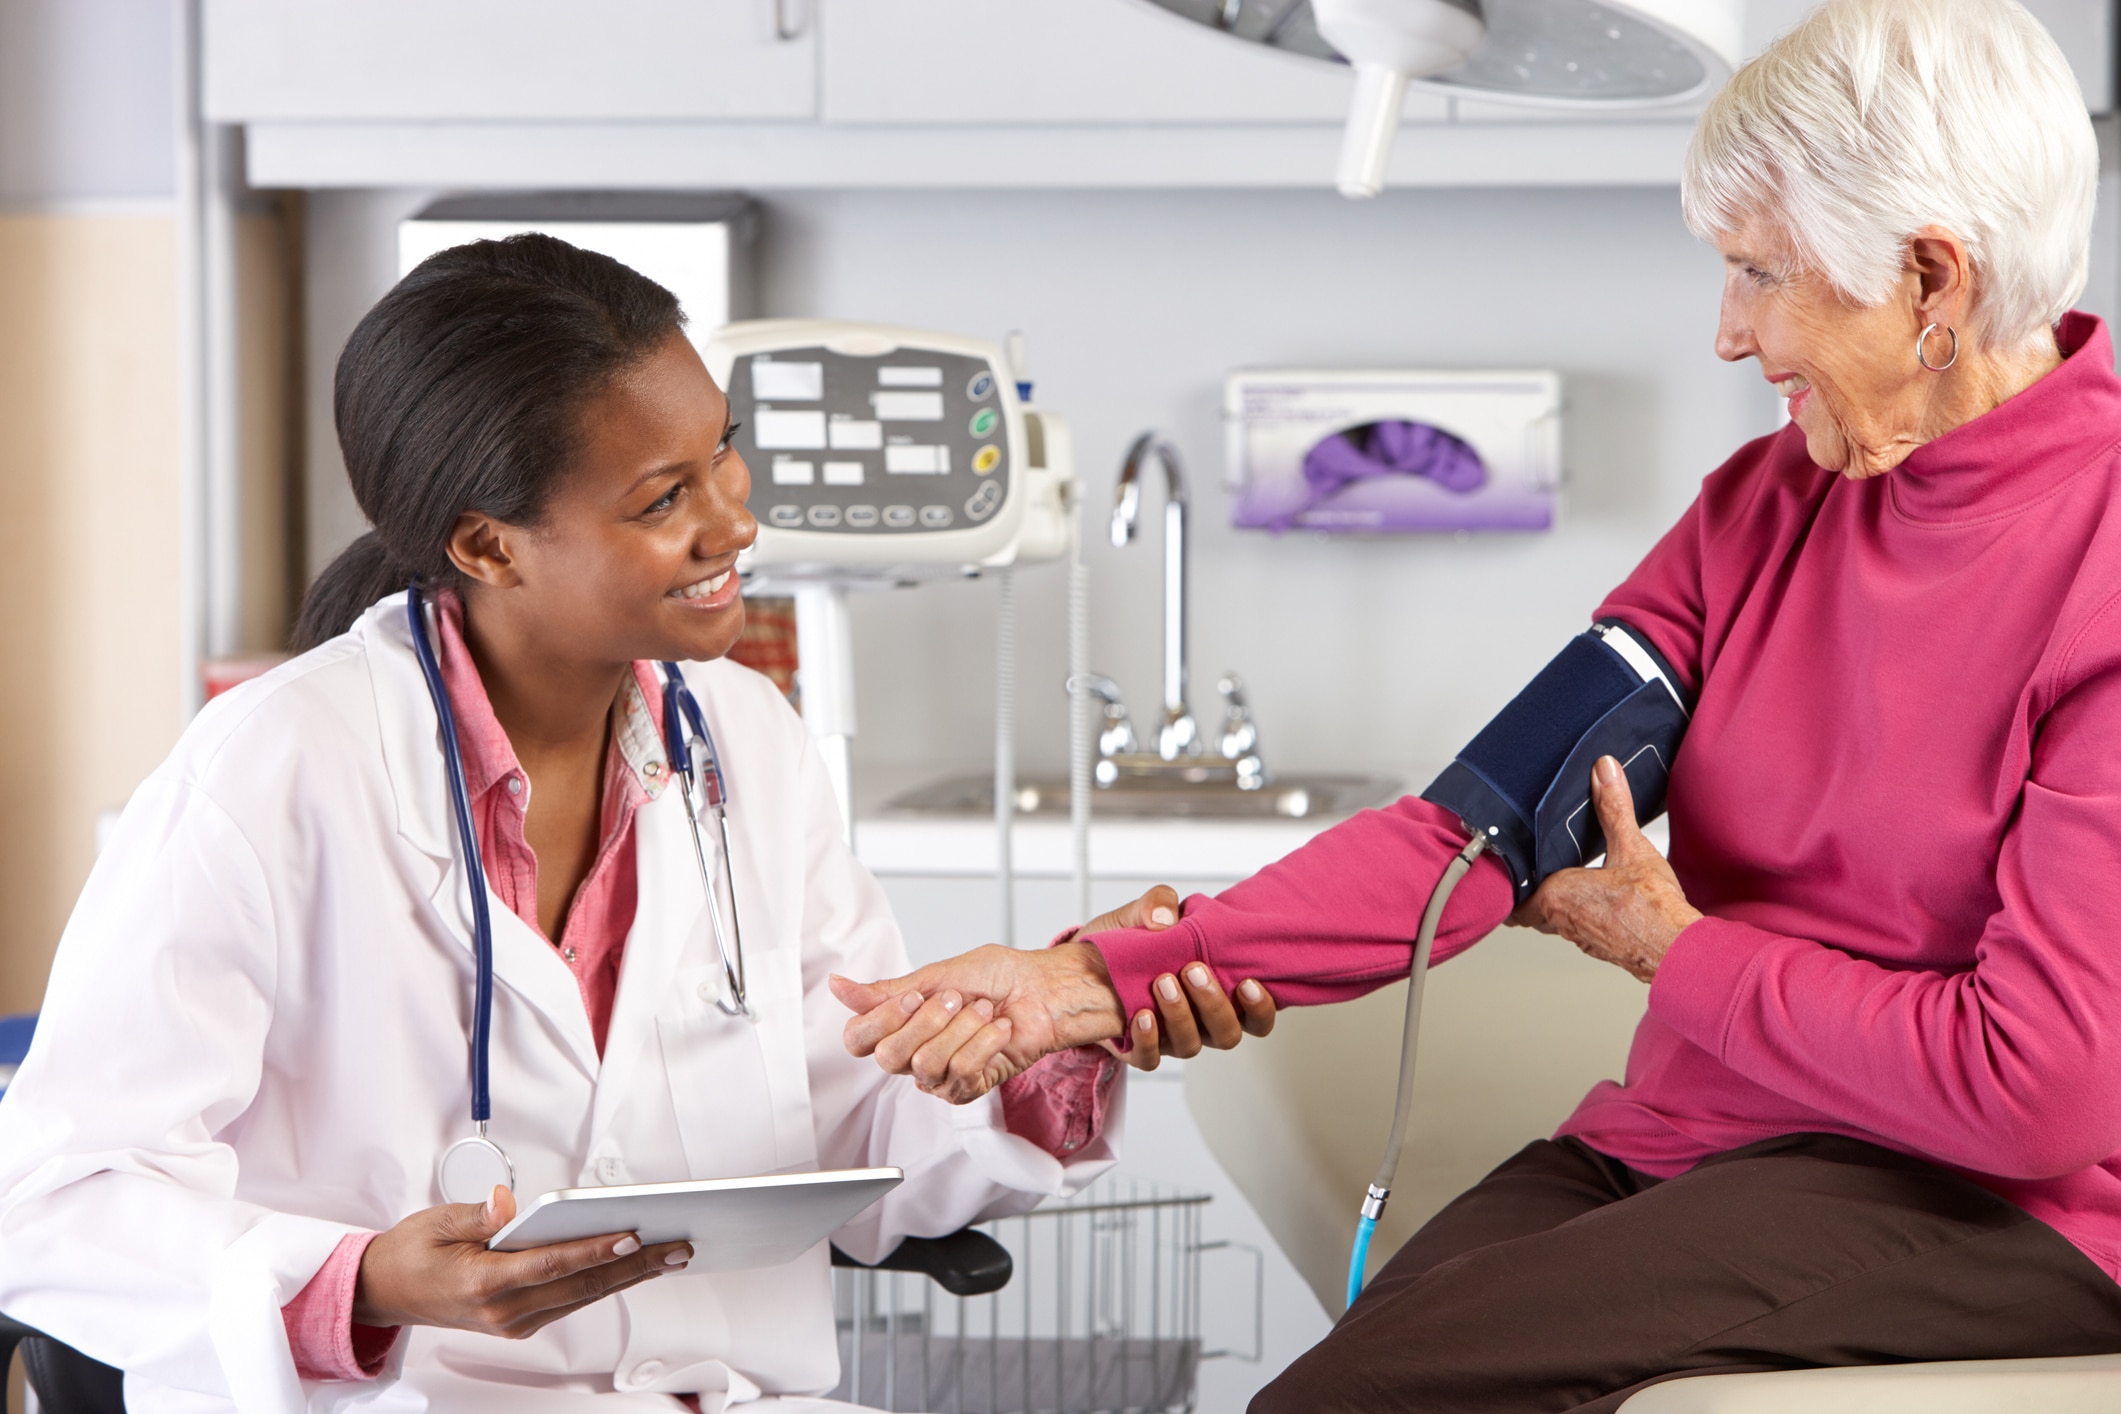 nurse taking patients blood pressure while holding her wrist